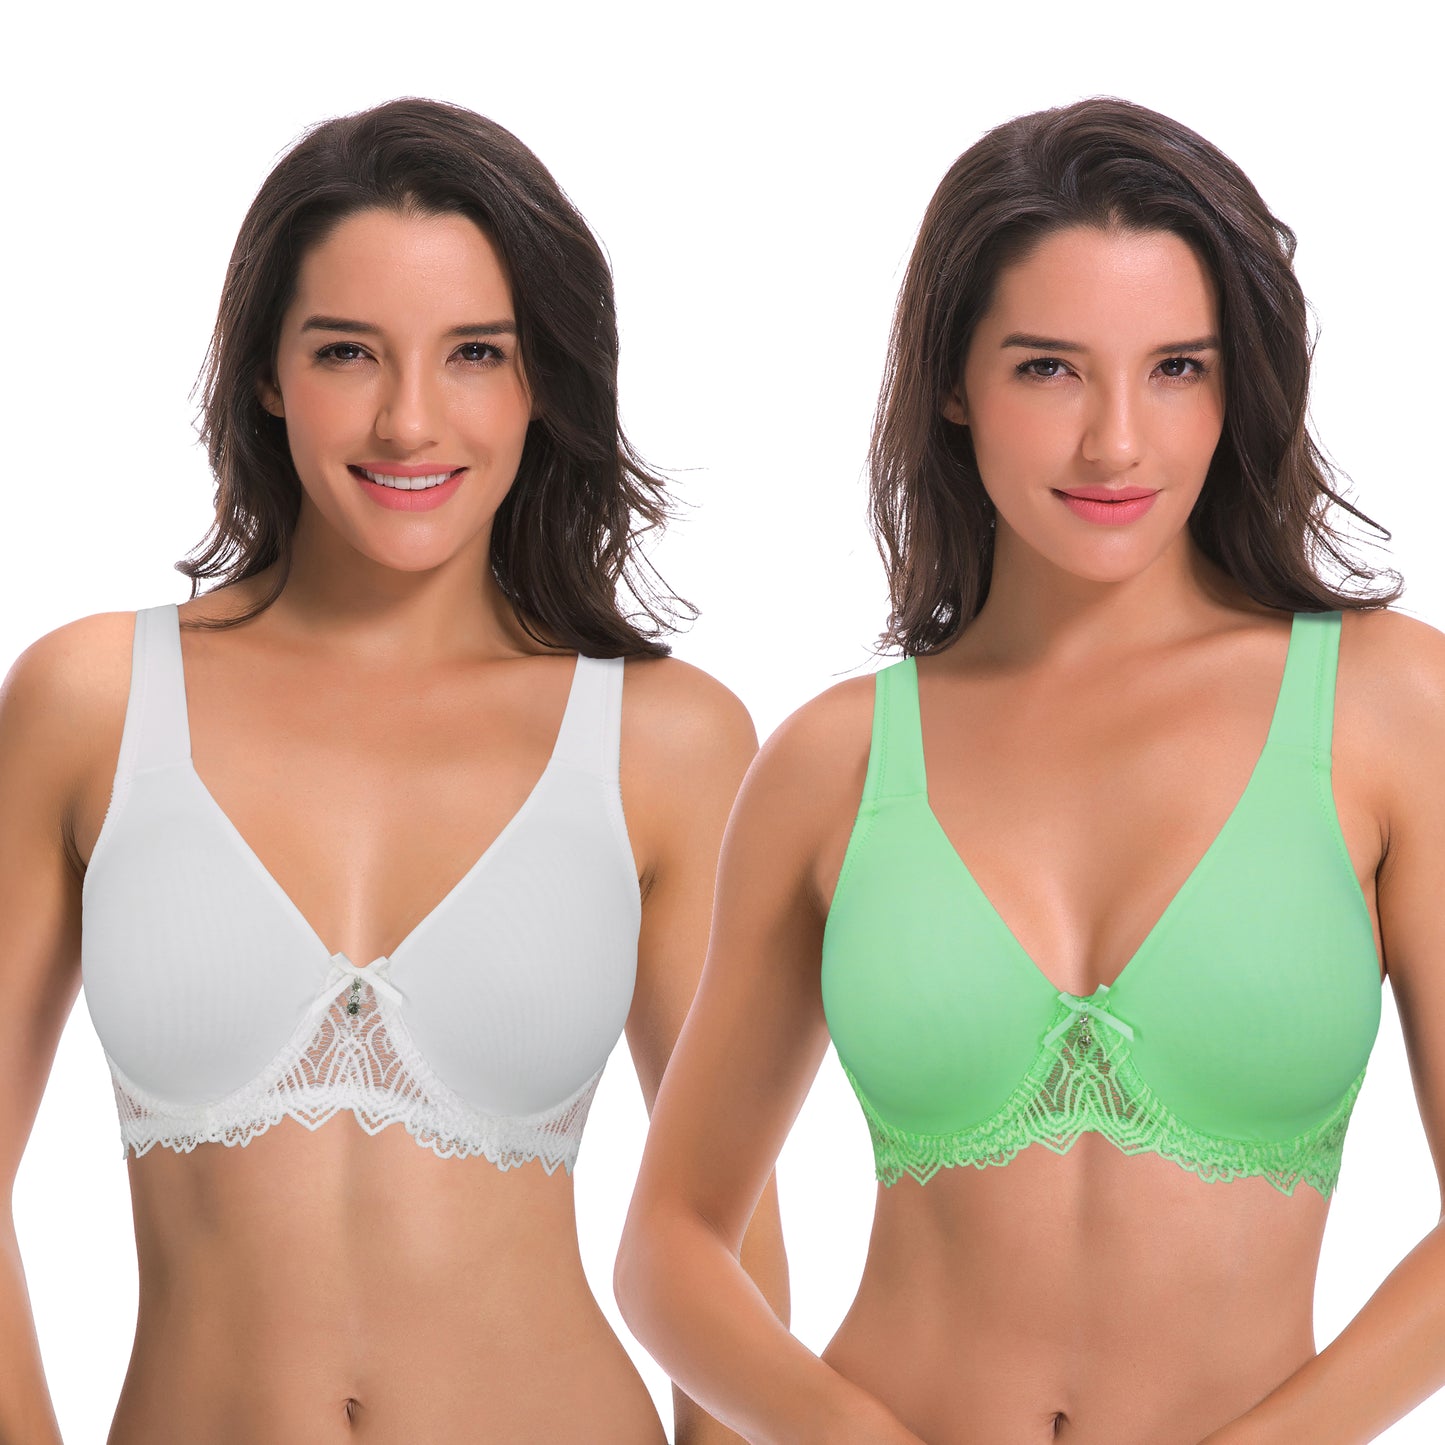 Women's Plus Size Unlined Underwire Lace Bra with Cushion Straps-2PK-WHITE,GREEN